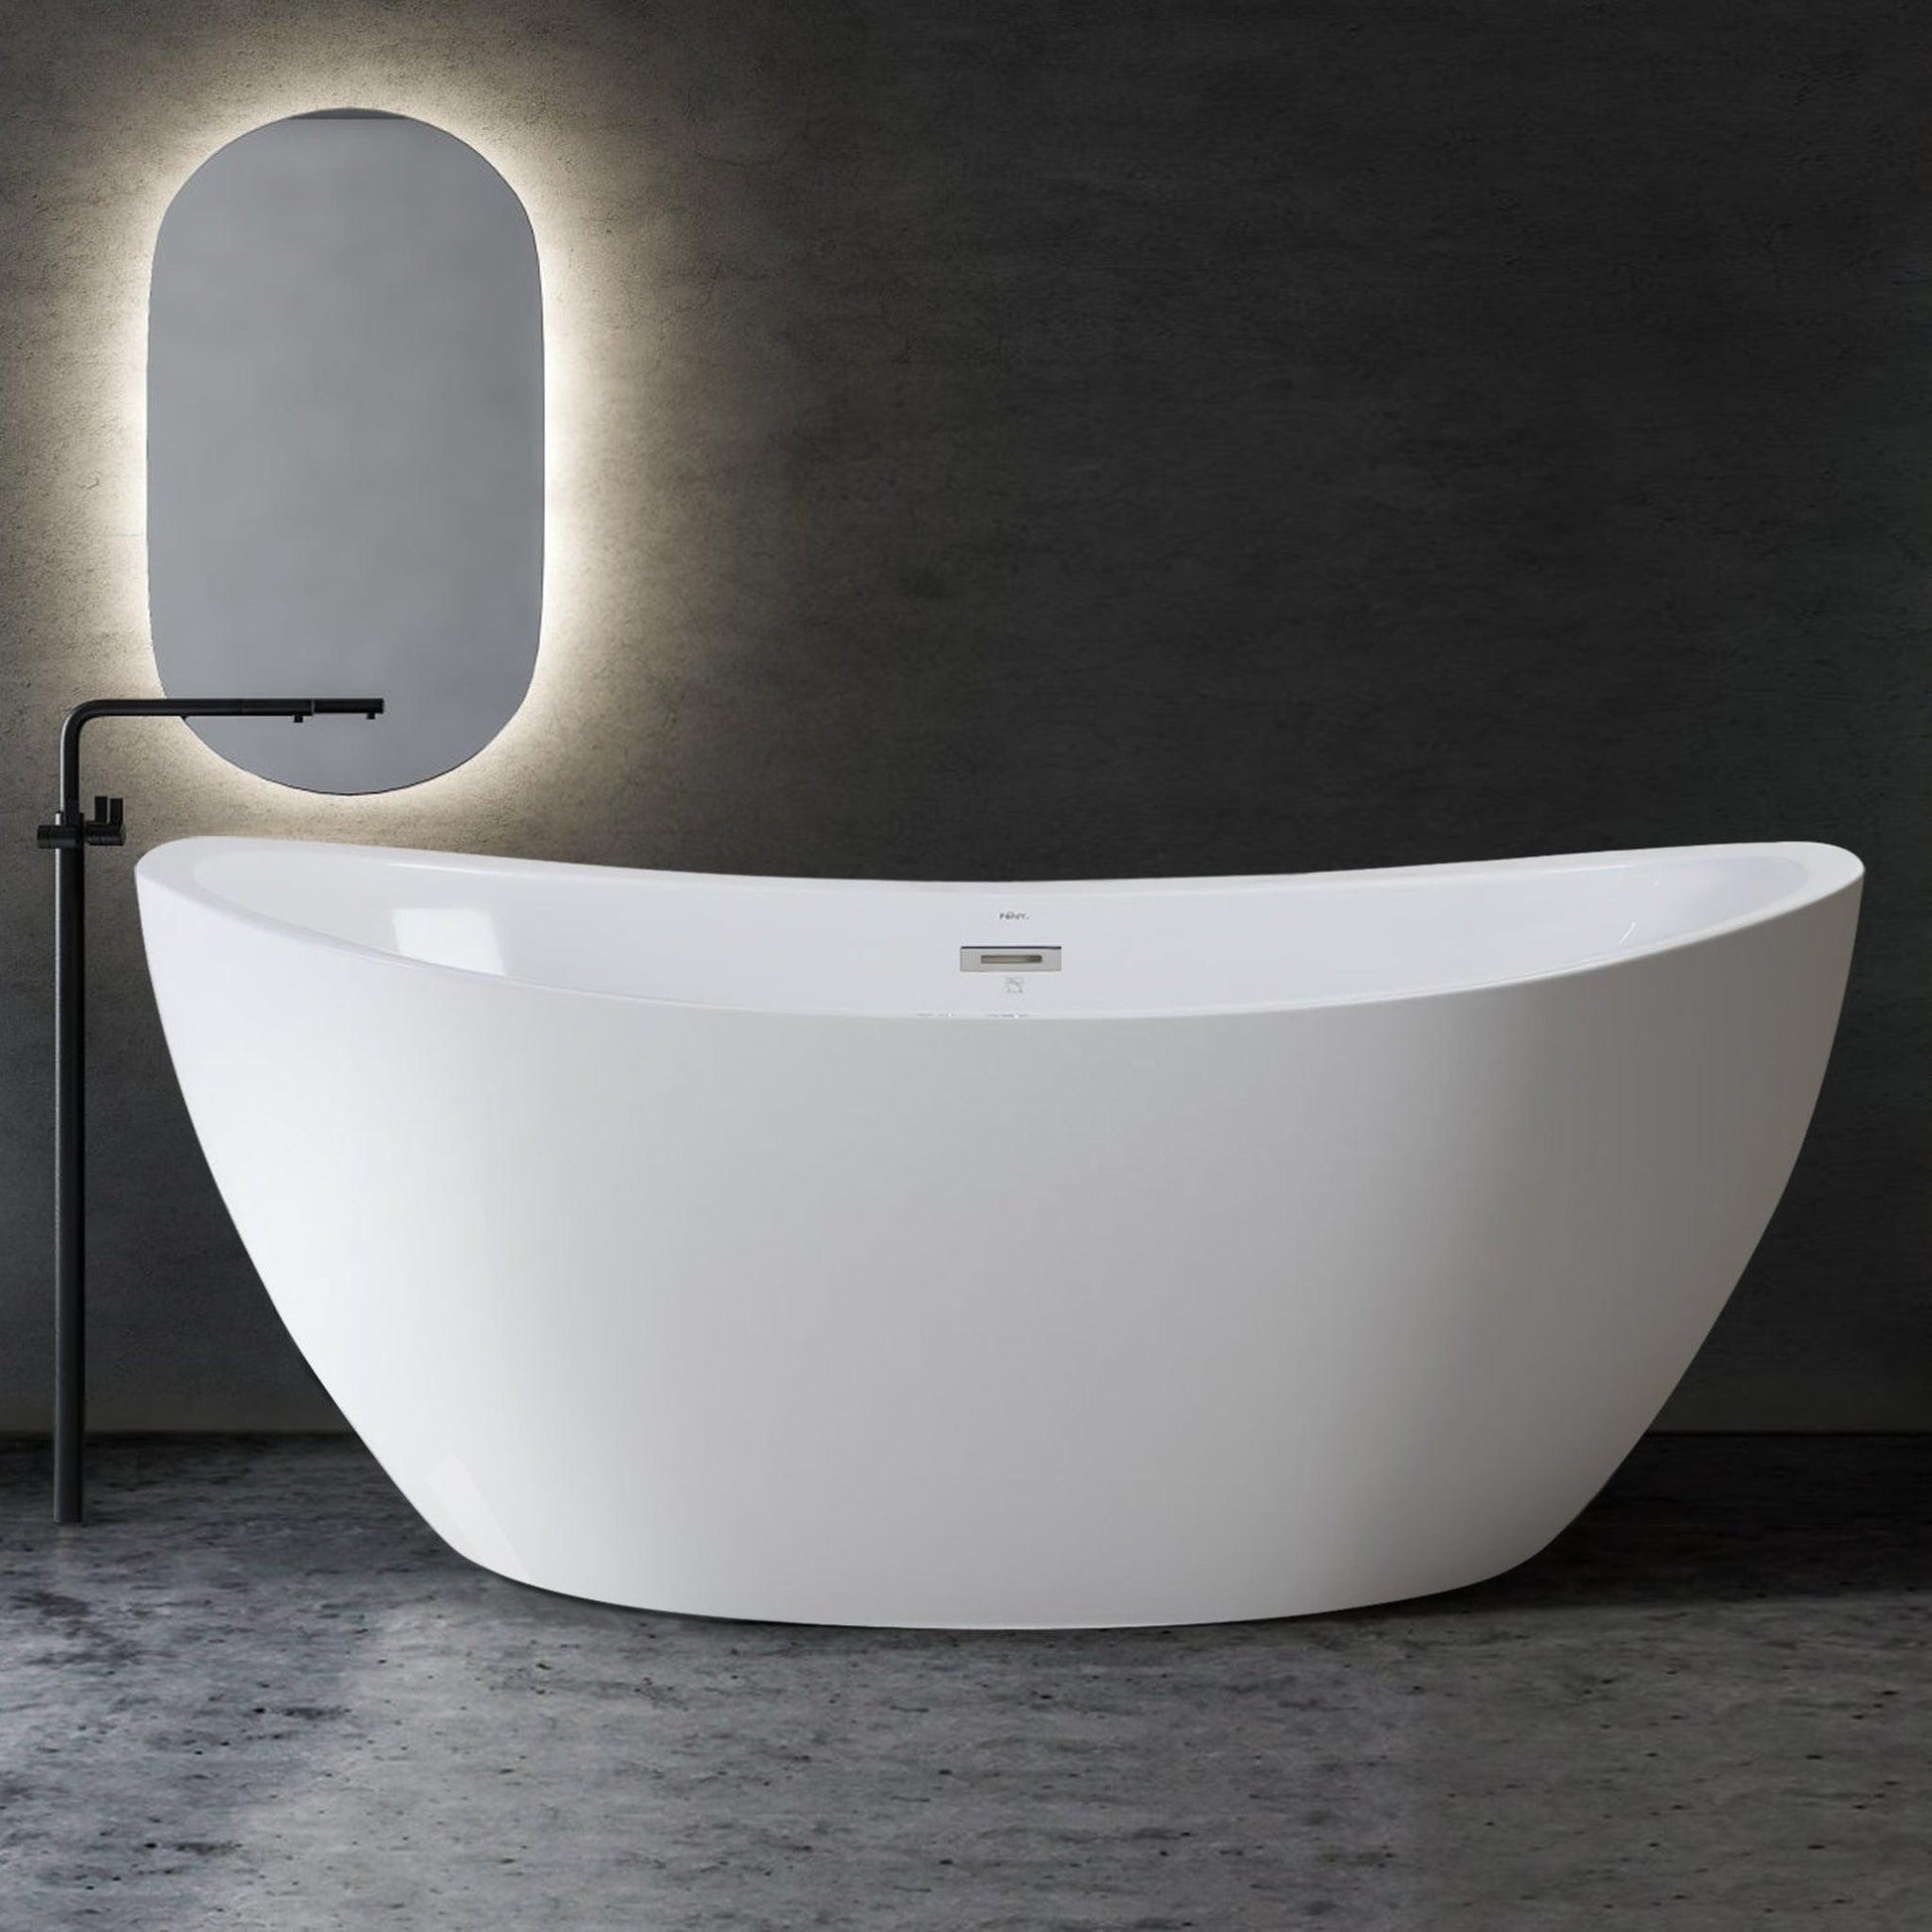 FerdY Naha 67" x 31" Oval Glossy White Acrylic Freestanding Double Slipper Soaking Bathtub With Chrome Drain and Overflow